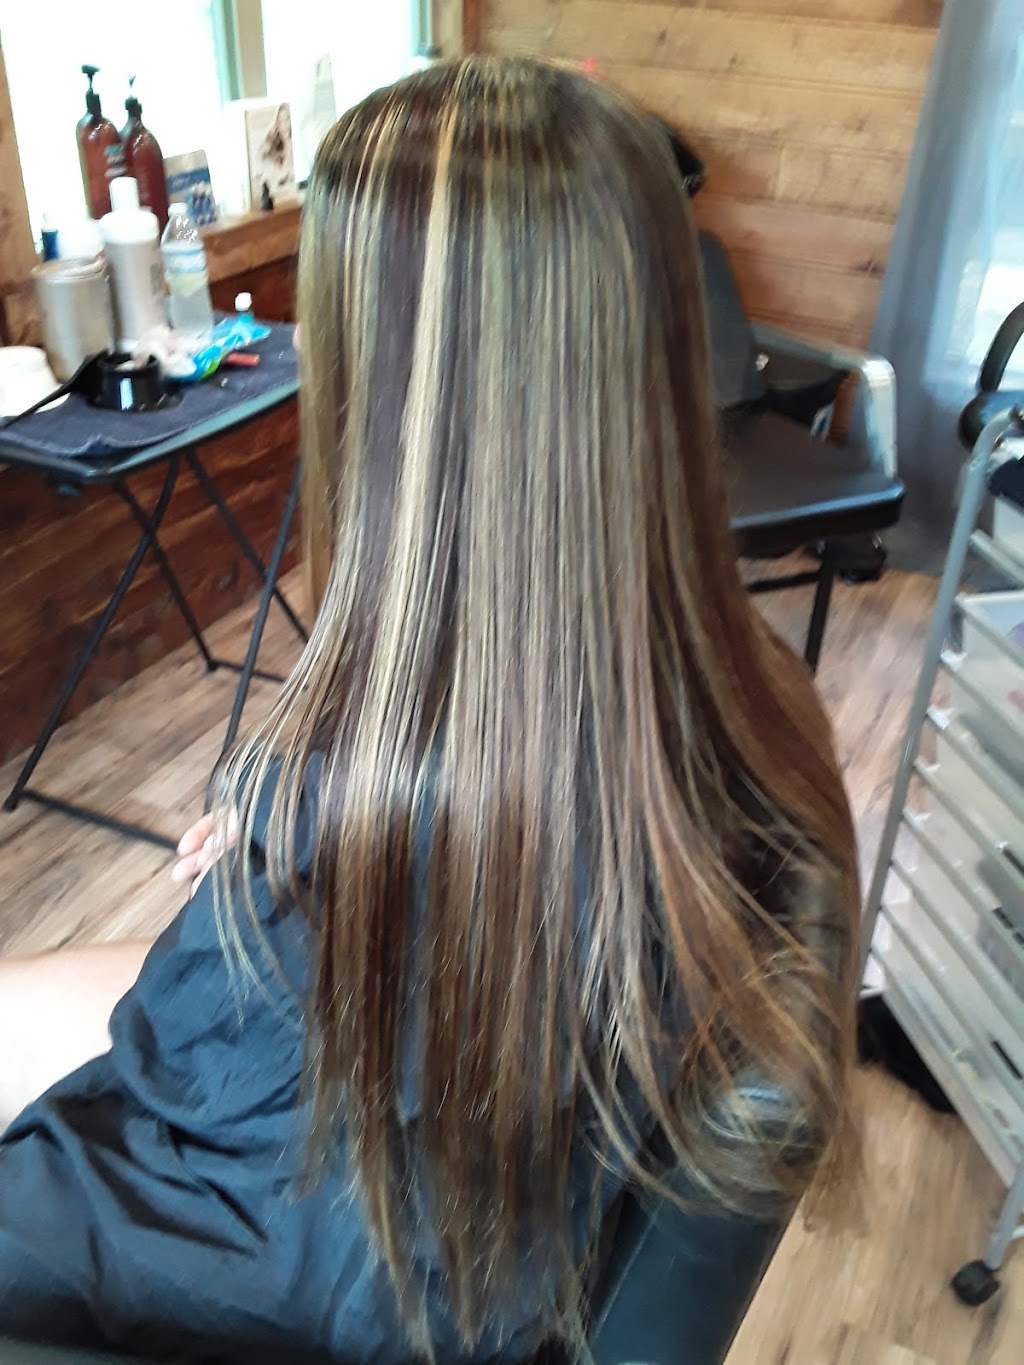 Southern Roots Salon | 491 Old San Antonio Rd, Dale, TX 78616 | Phone: (512) 516-7470